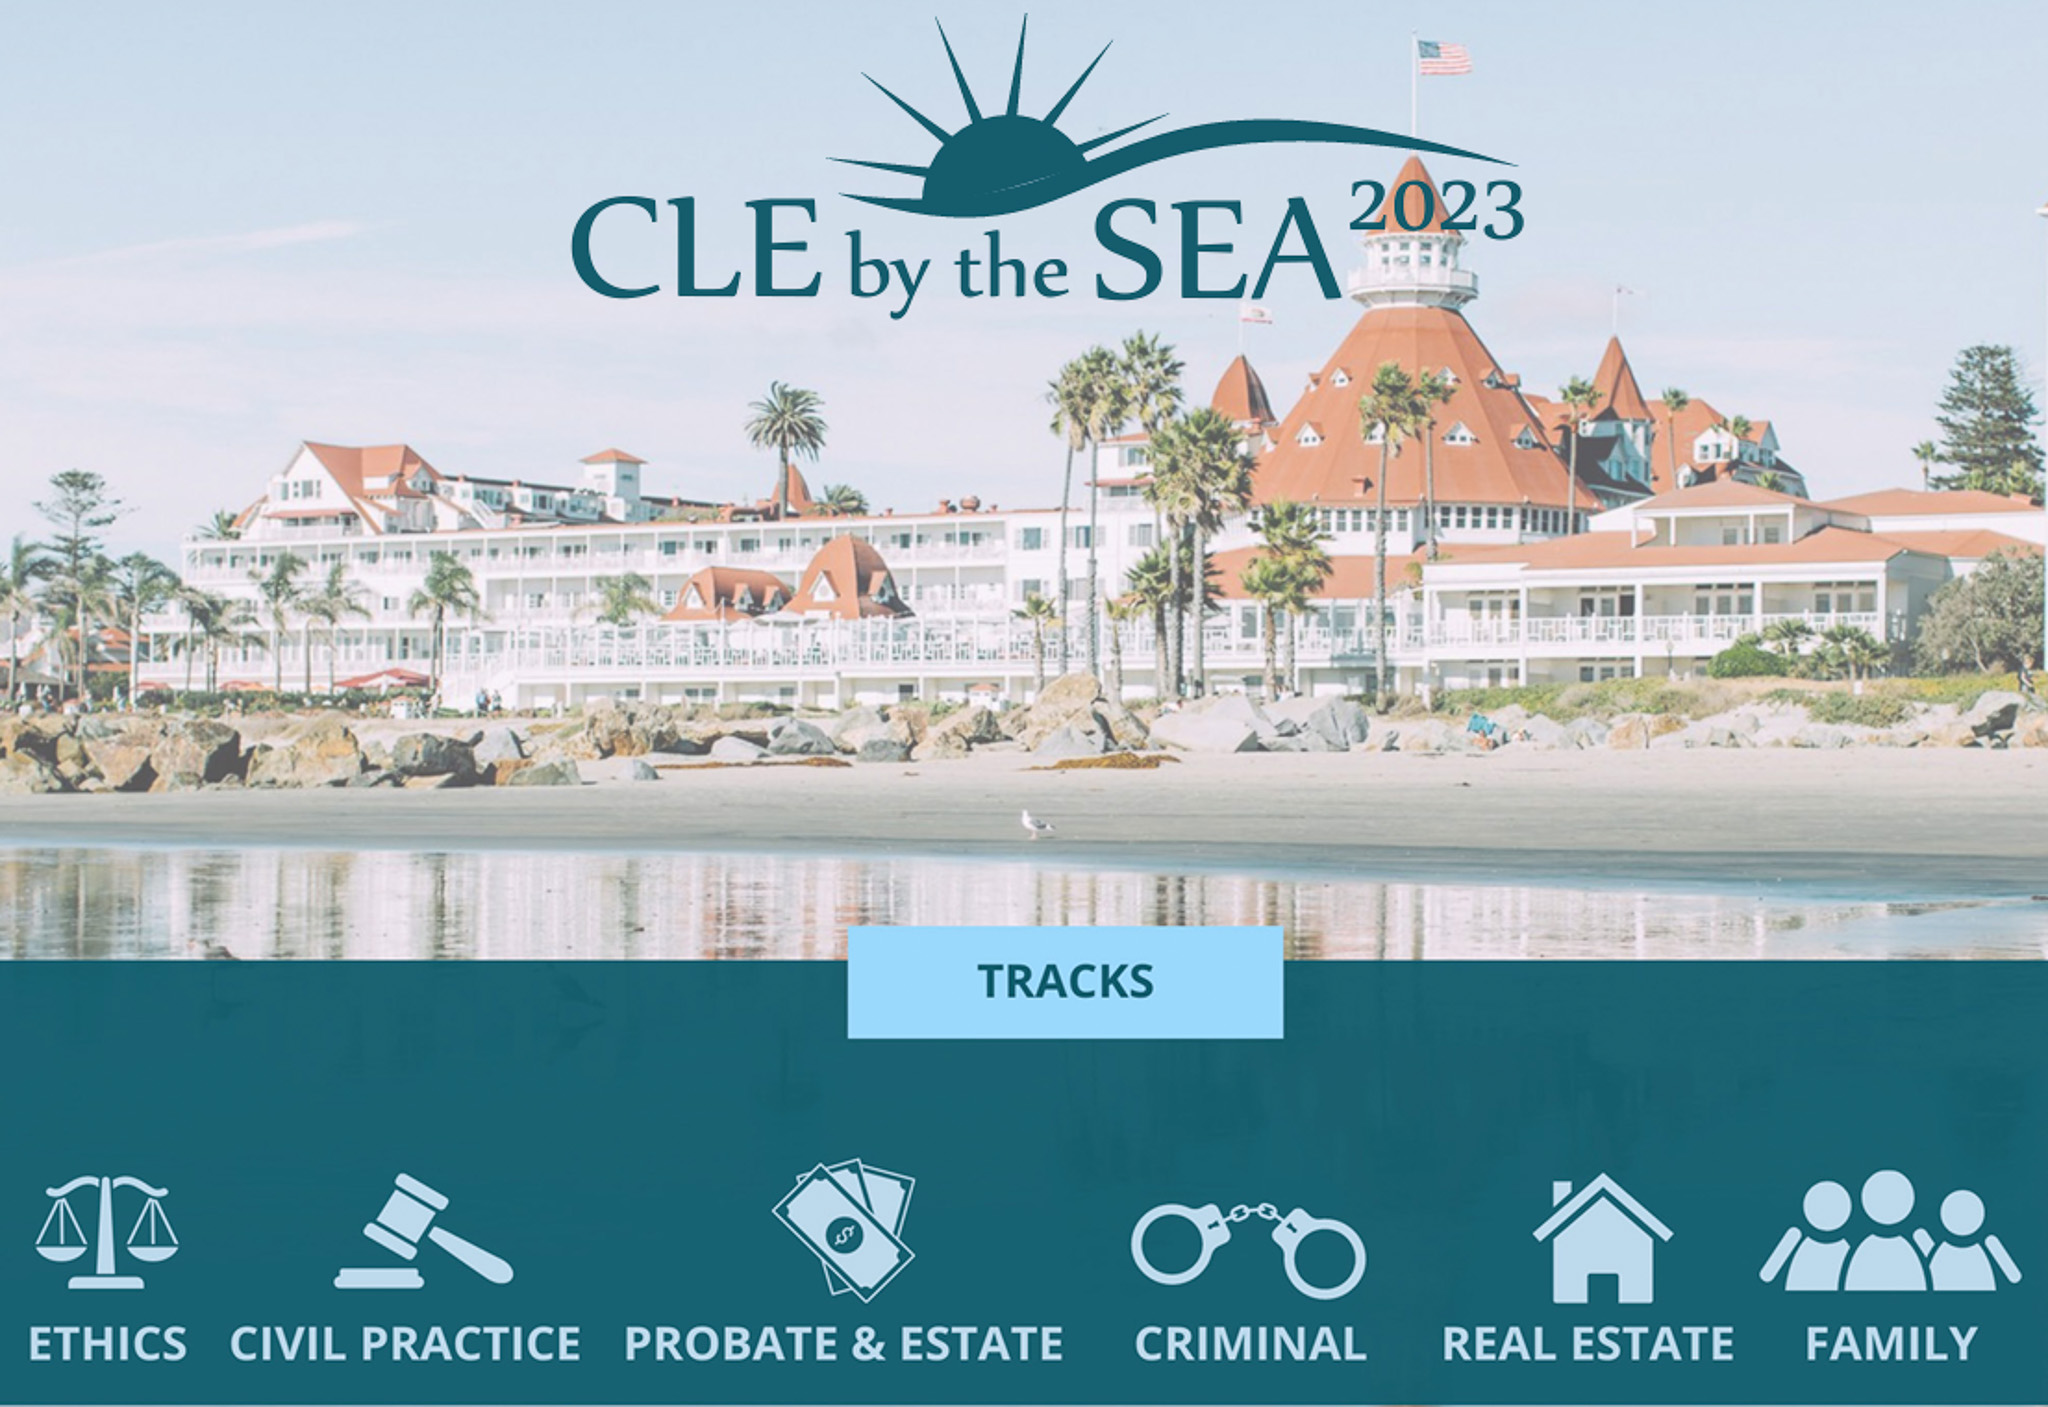 CLE by the Sea Track Information